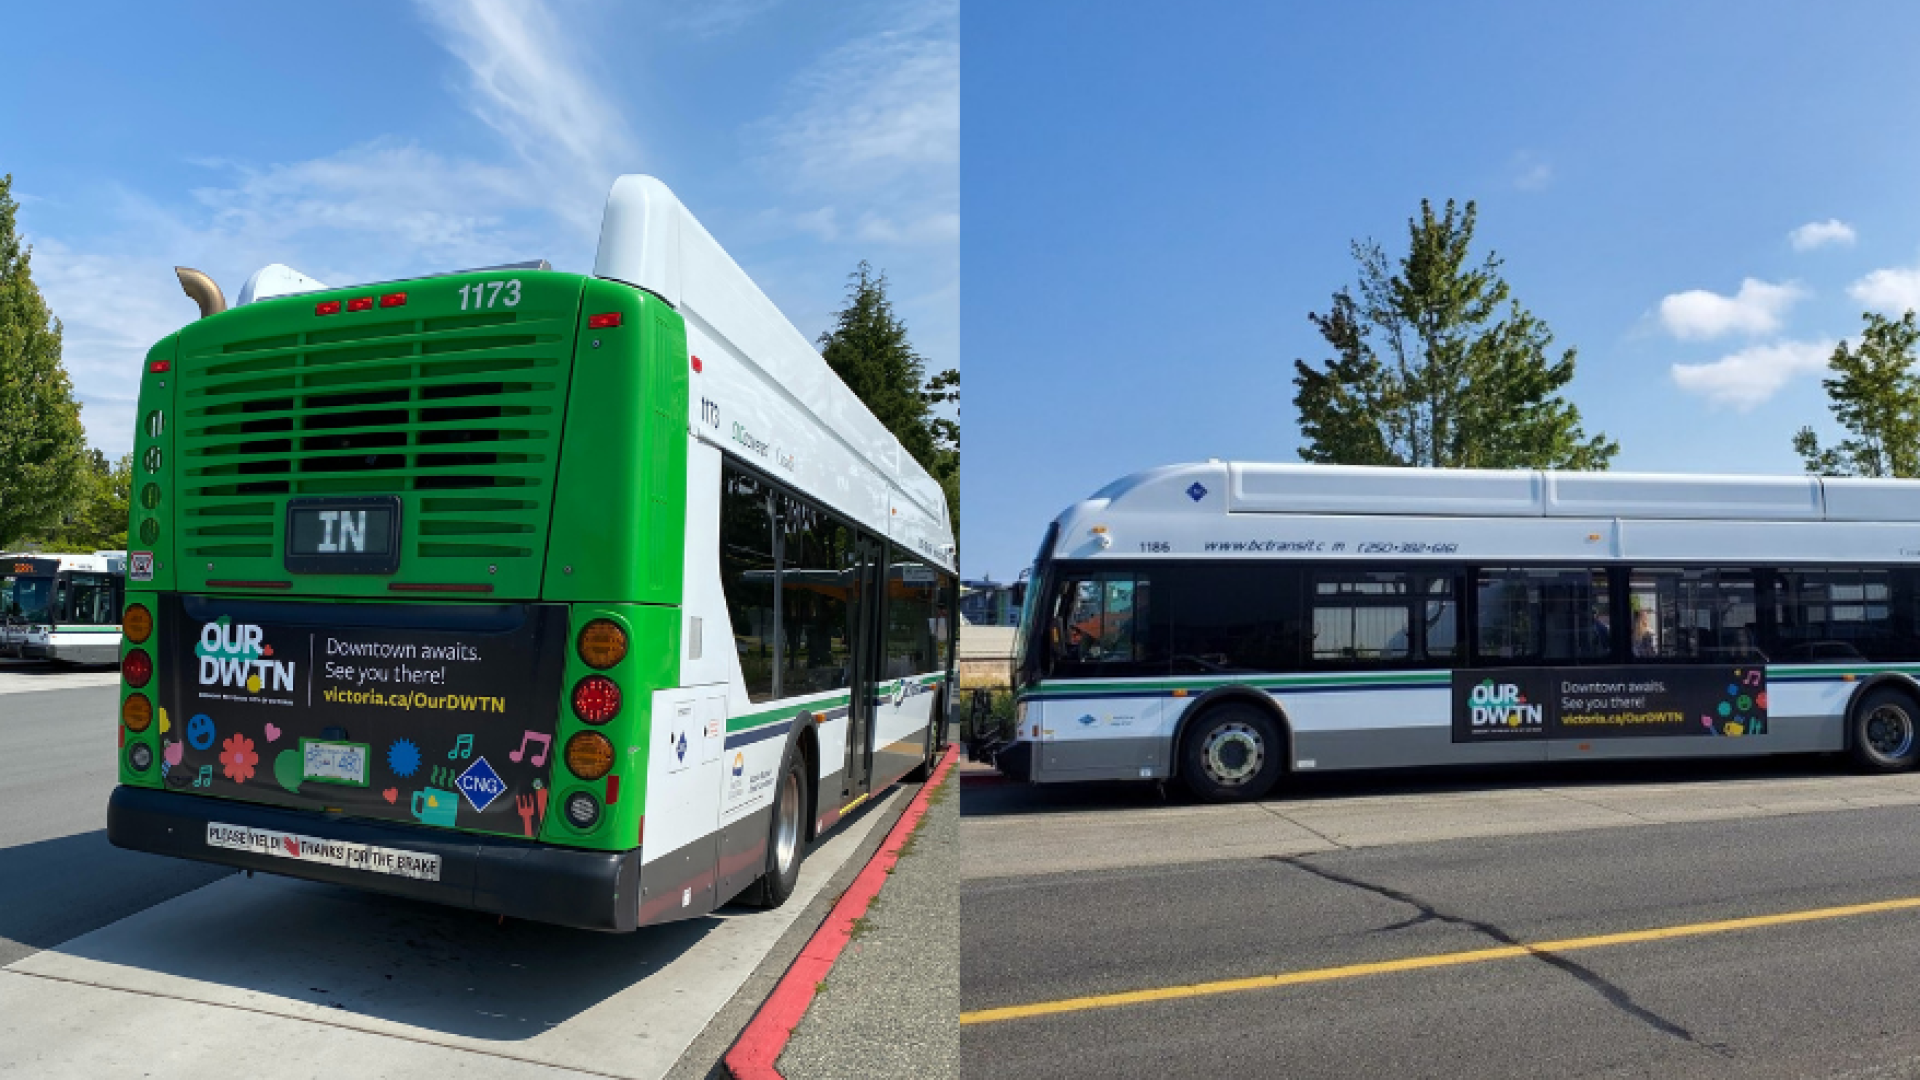 Two images of a BC Transit bus with OUR DWTN branding on the side and back. 